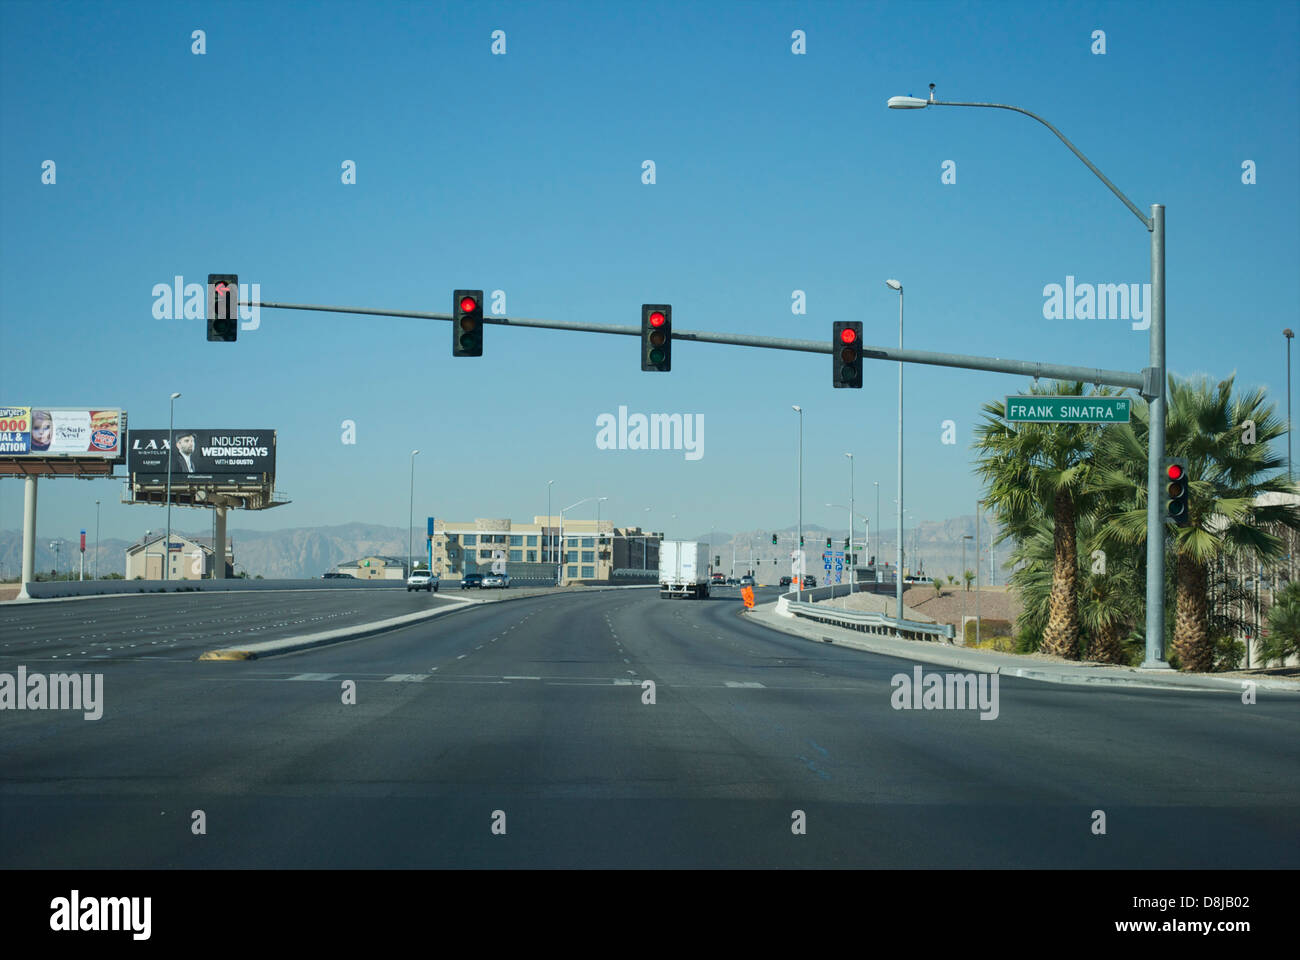 [Red light] [traffic lights] signals at a crossroads, America Stock Photo